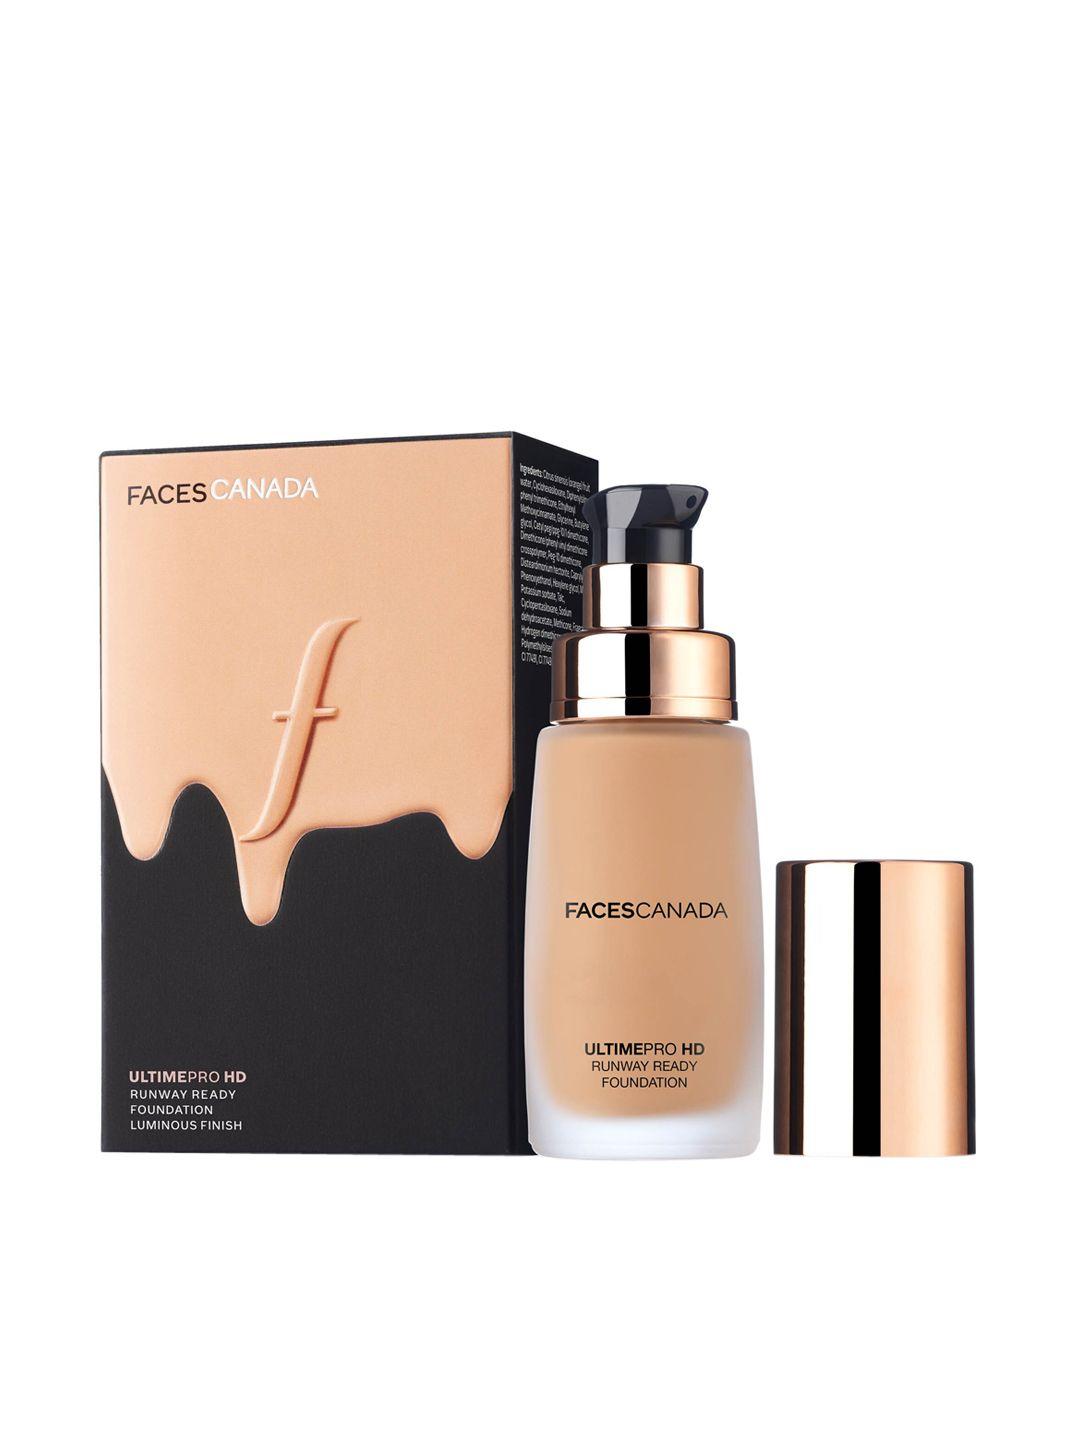 faces canada ultime pro hd runway ready foundation 30ml - sand 04